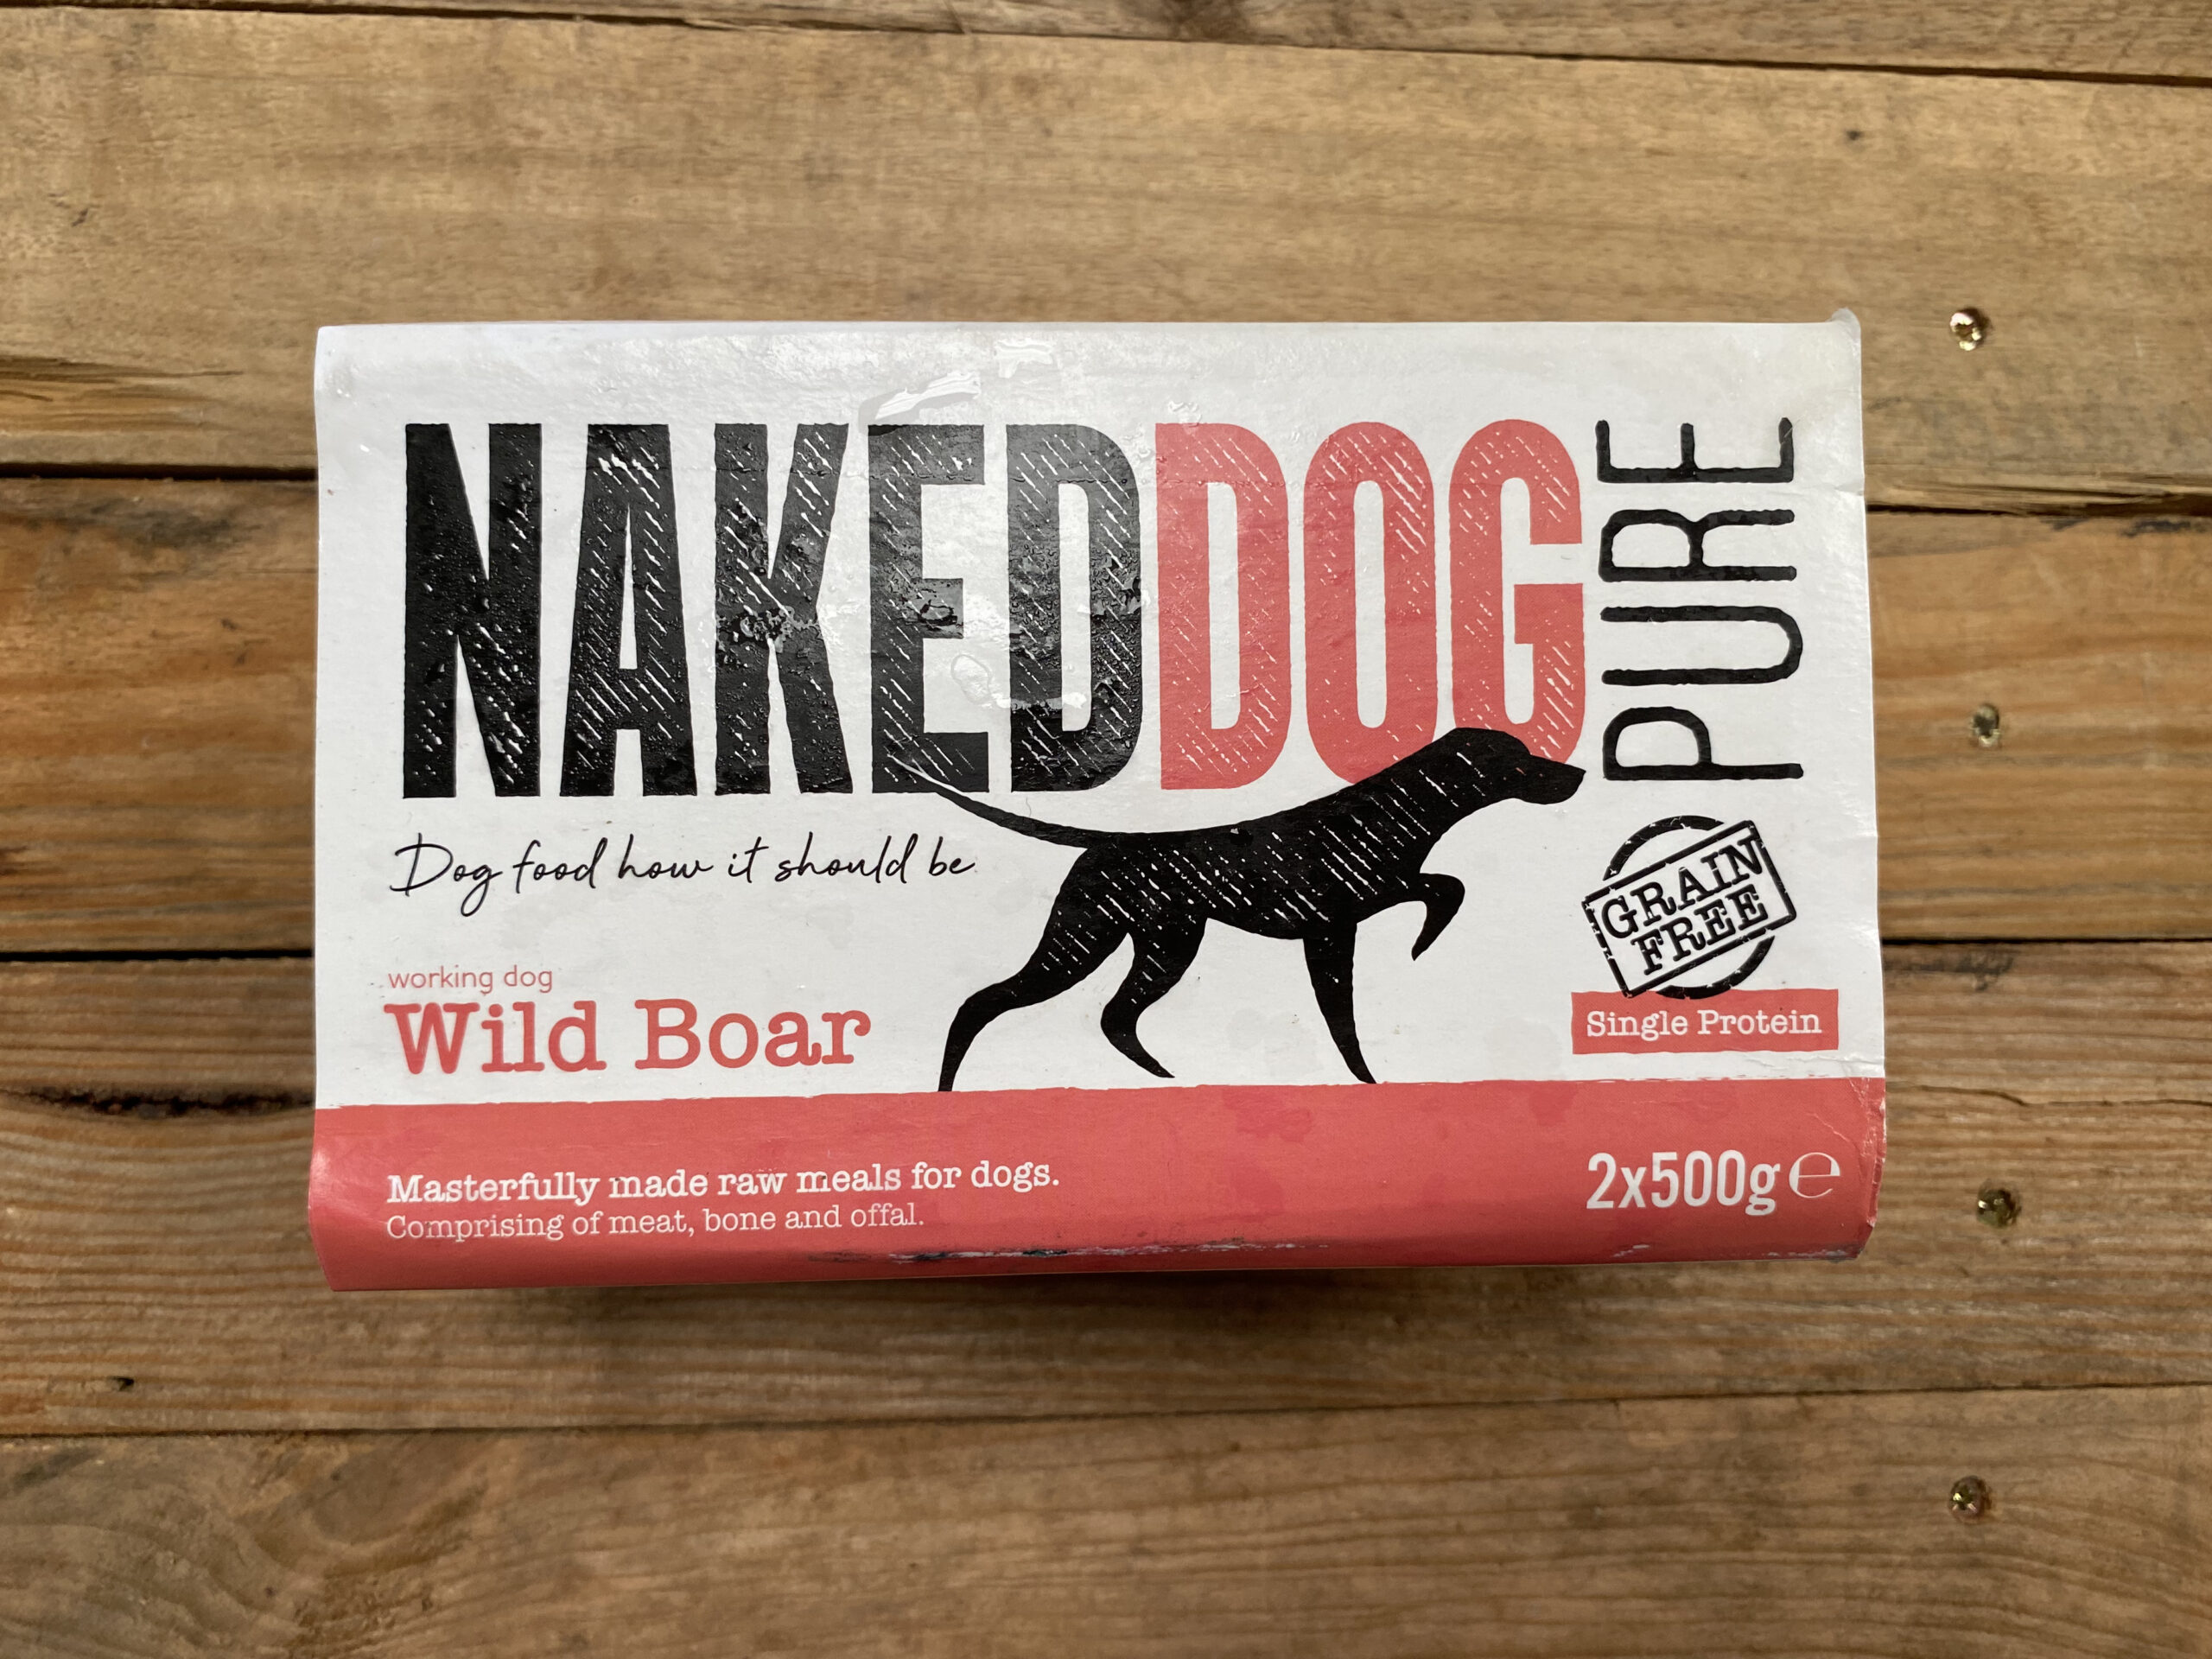 Naked Dog Pure Wild Boar – 2x500g